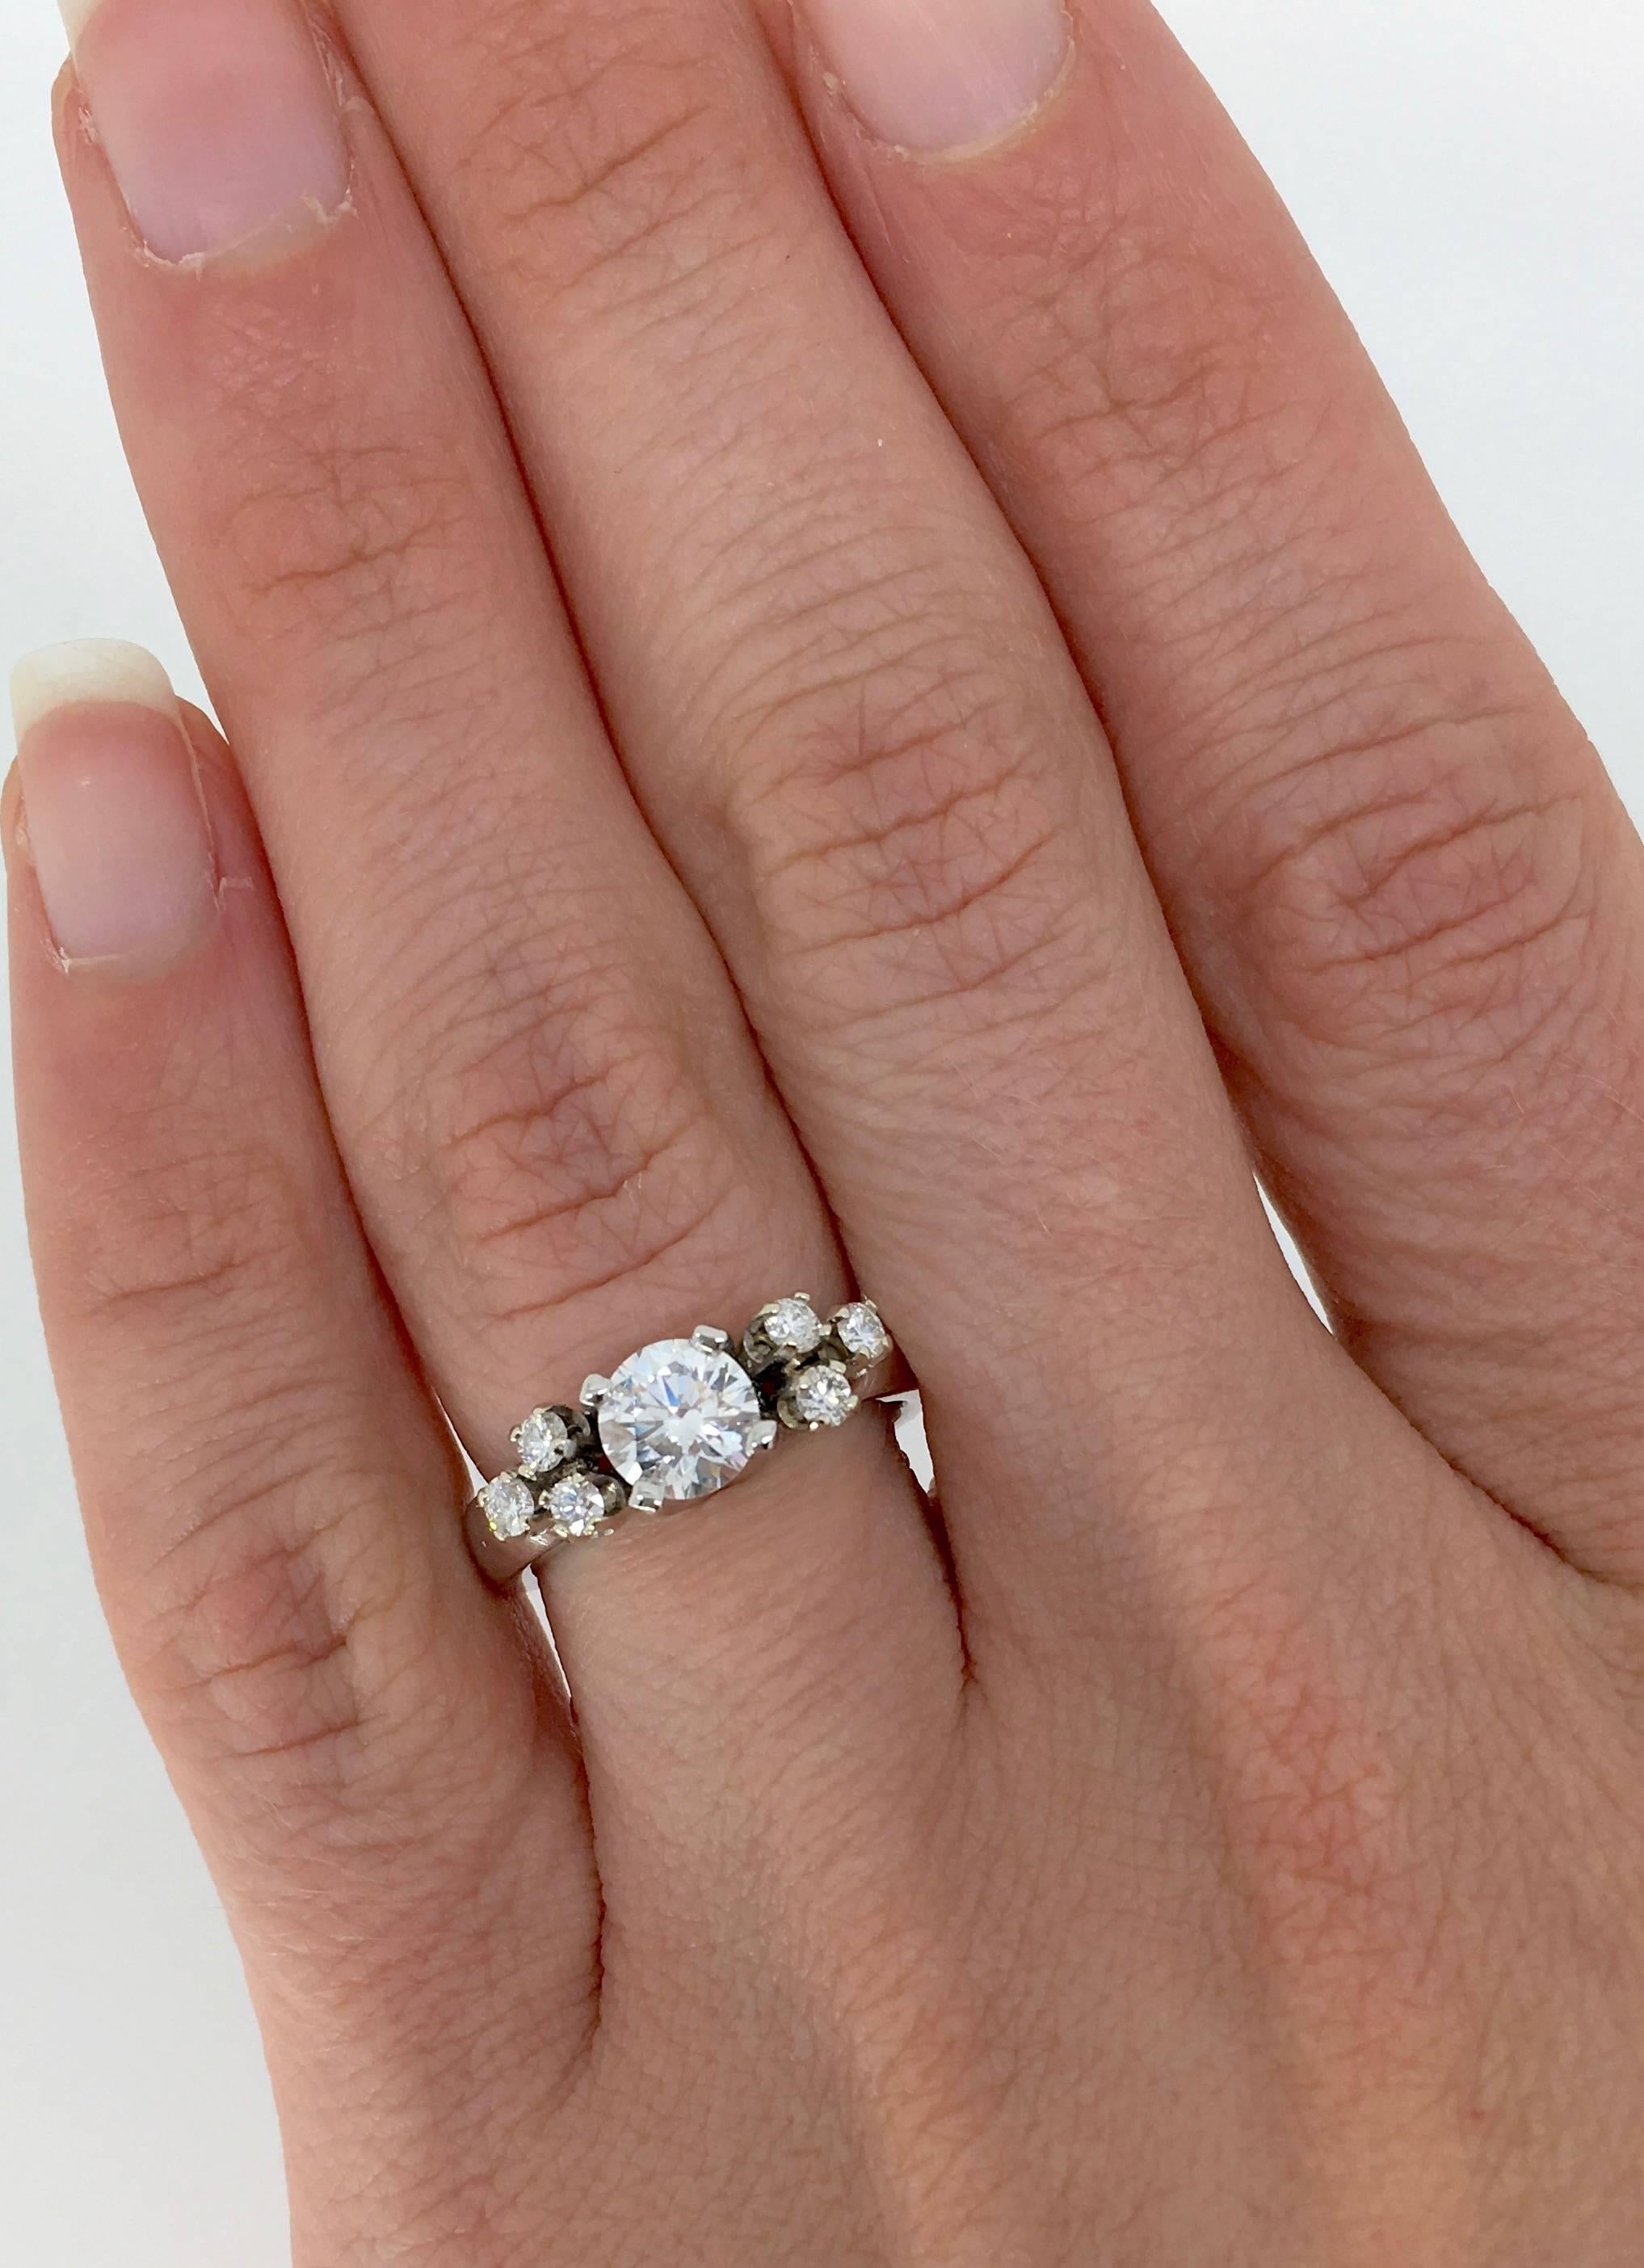 This gorgeous ring features a GIA certified .75CT Round Brilliant Cut Diamond in the center with D color, VS2 clarity. The featured diamond is laser scribed with the GIA certification # 13205201. There are 6 additional Round Brilliant Cut Diamonds